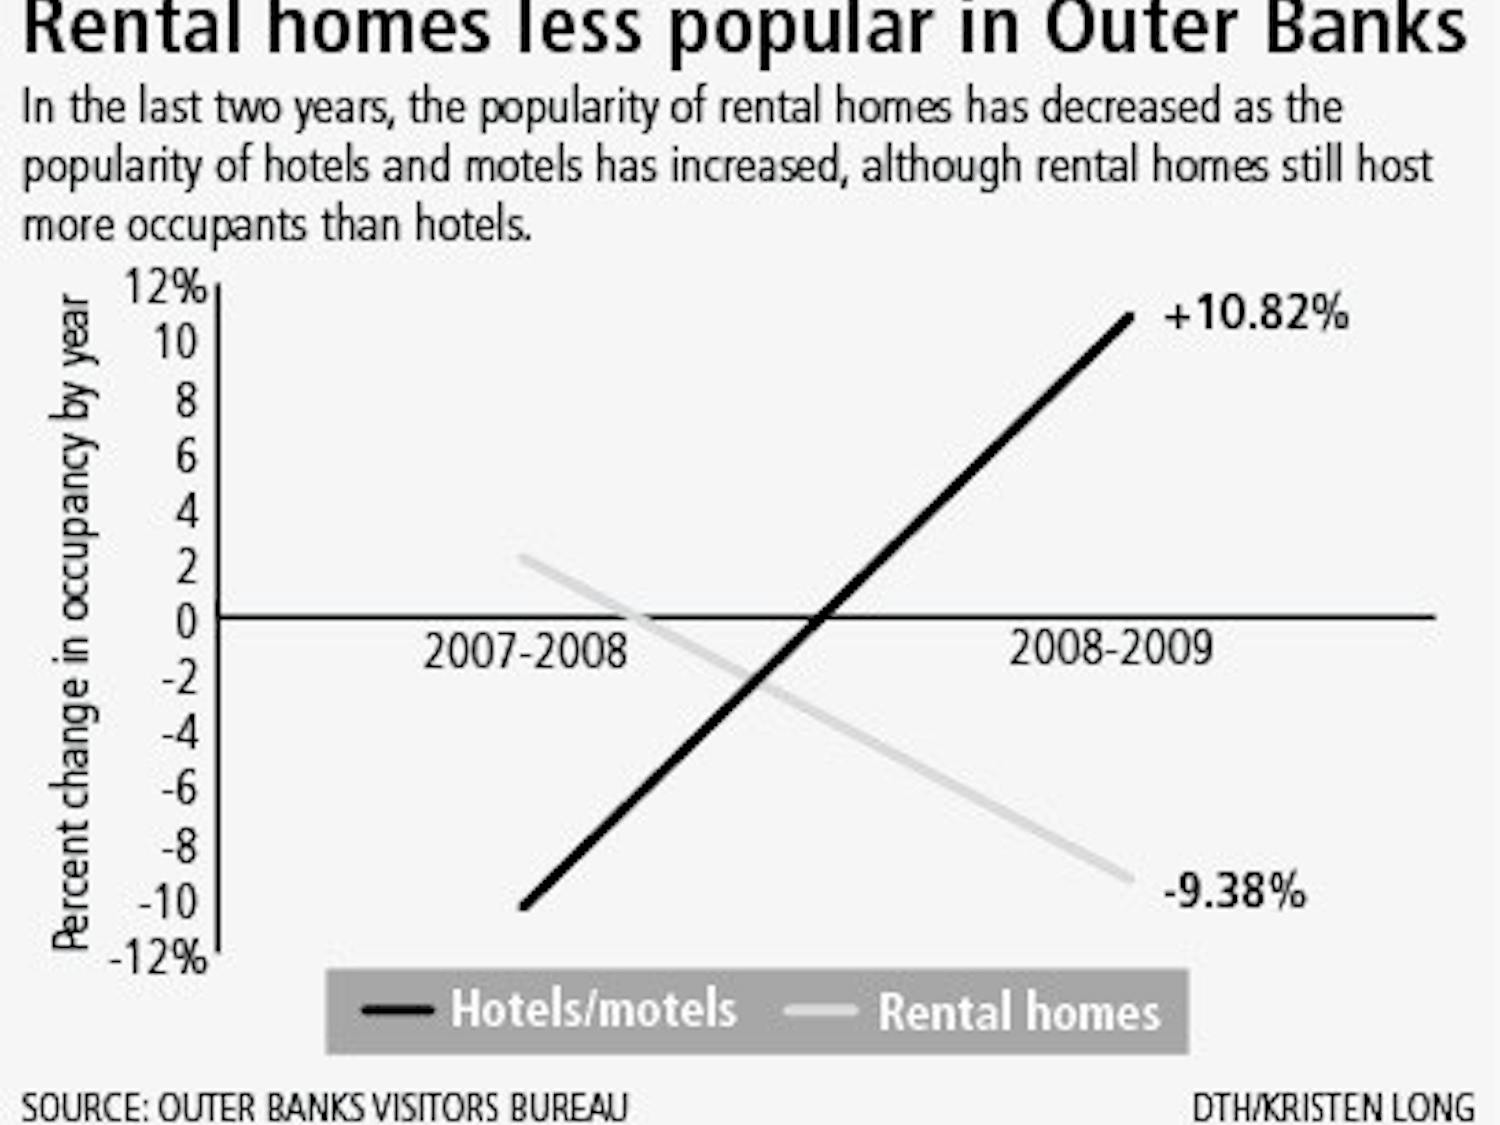 Rental homes less popular in Outer Banks